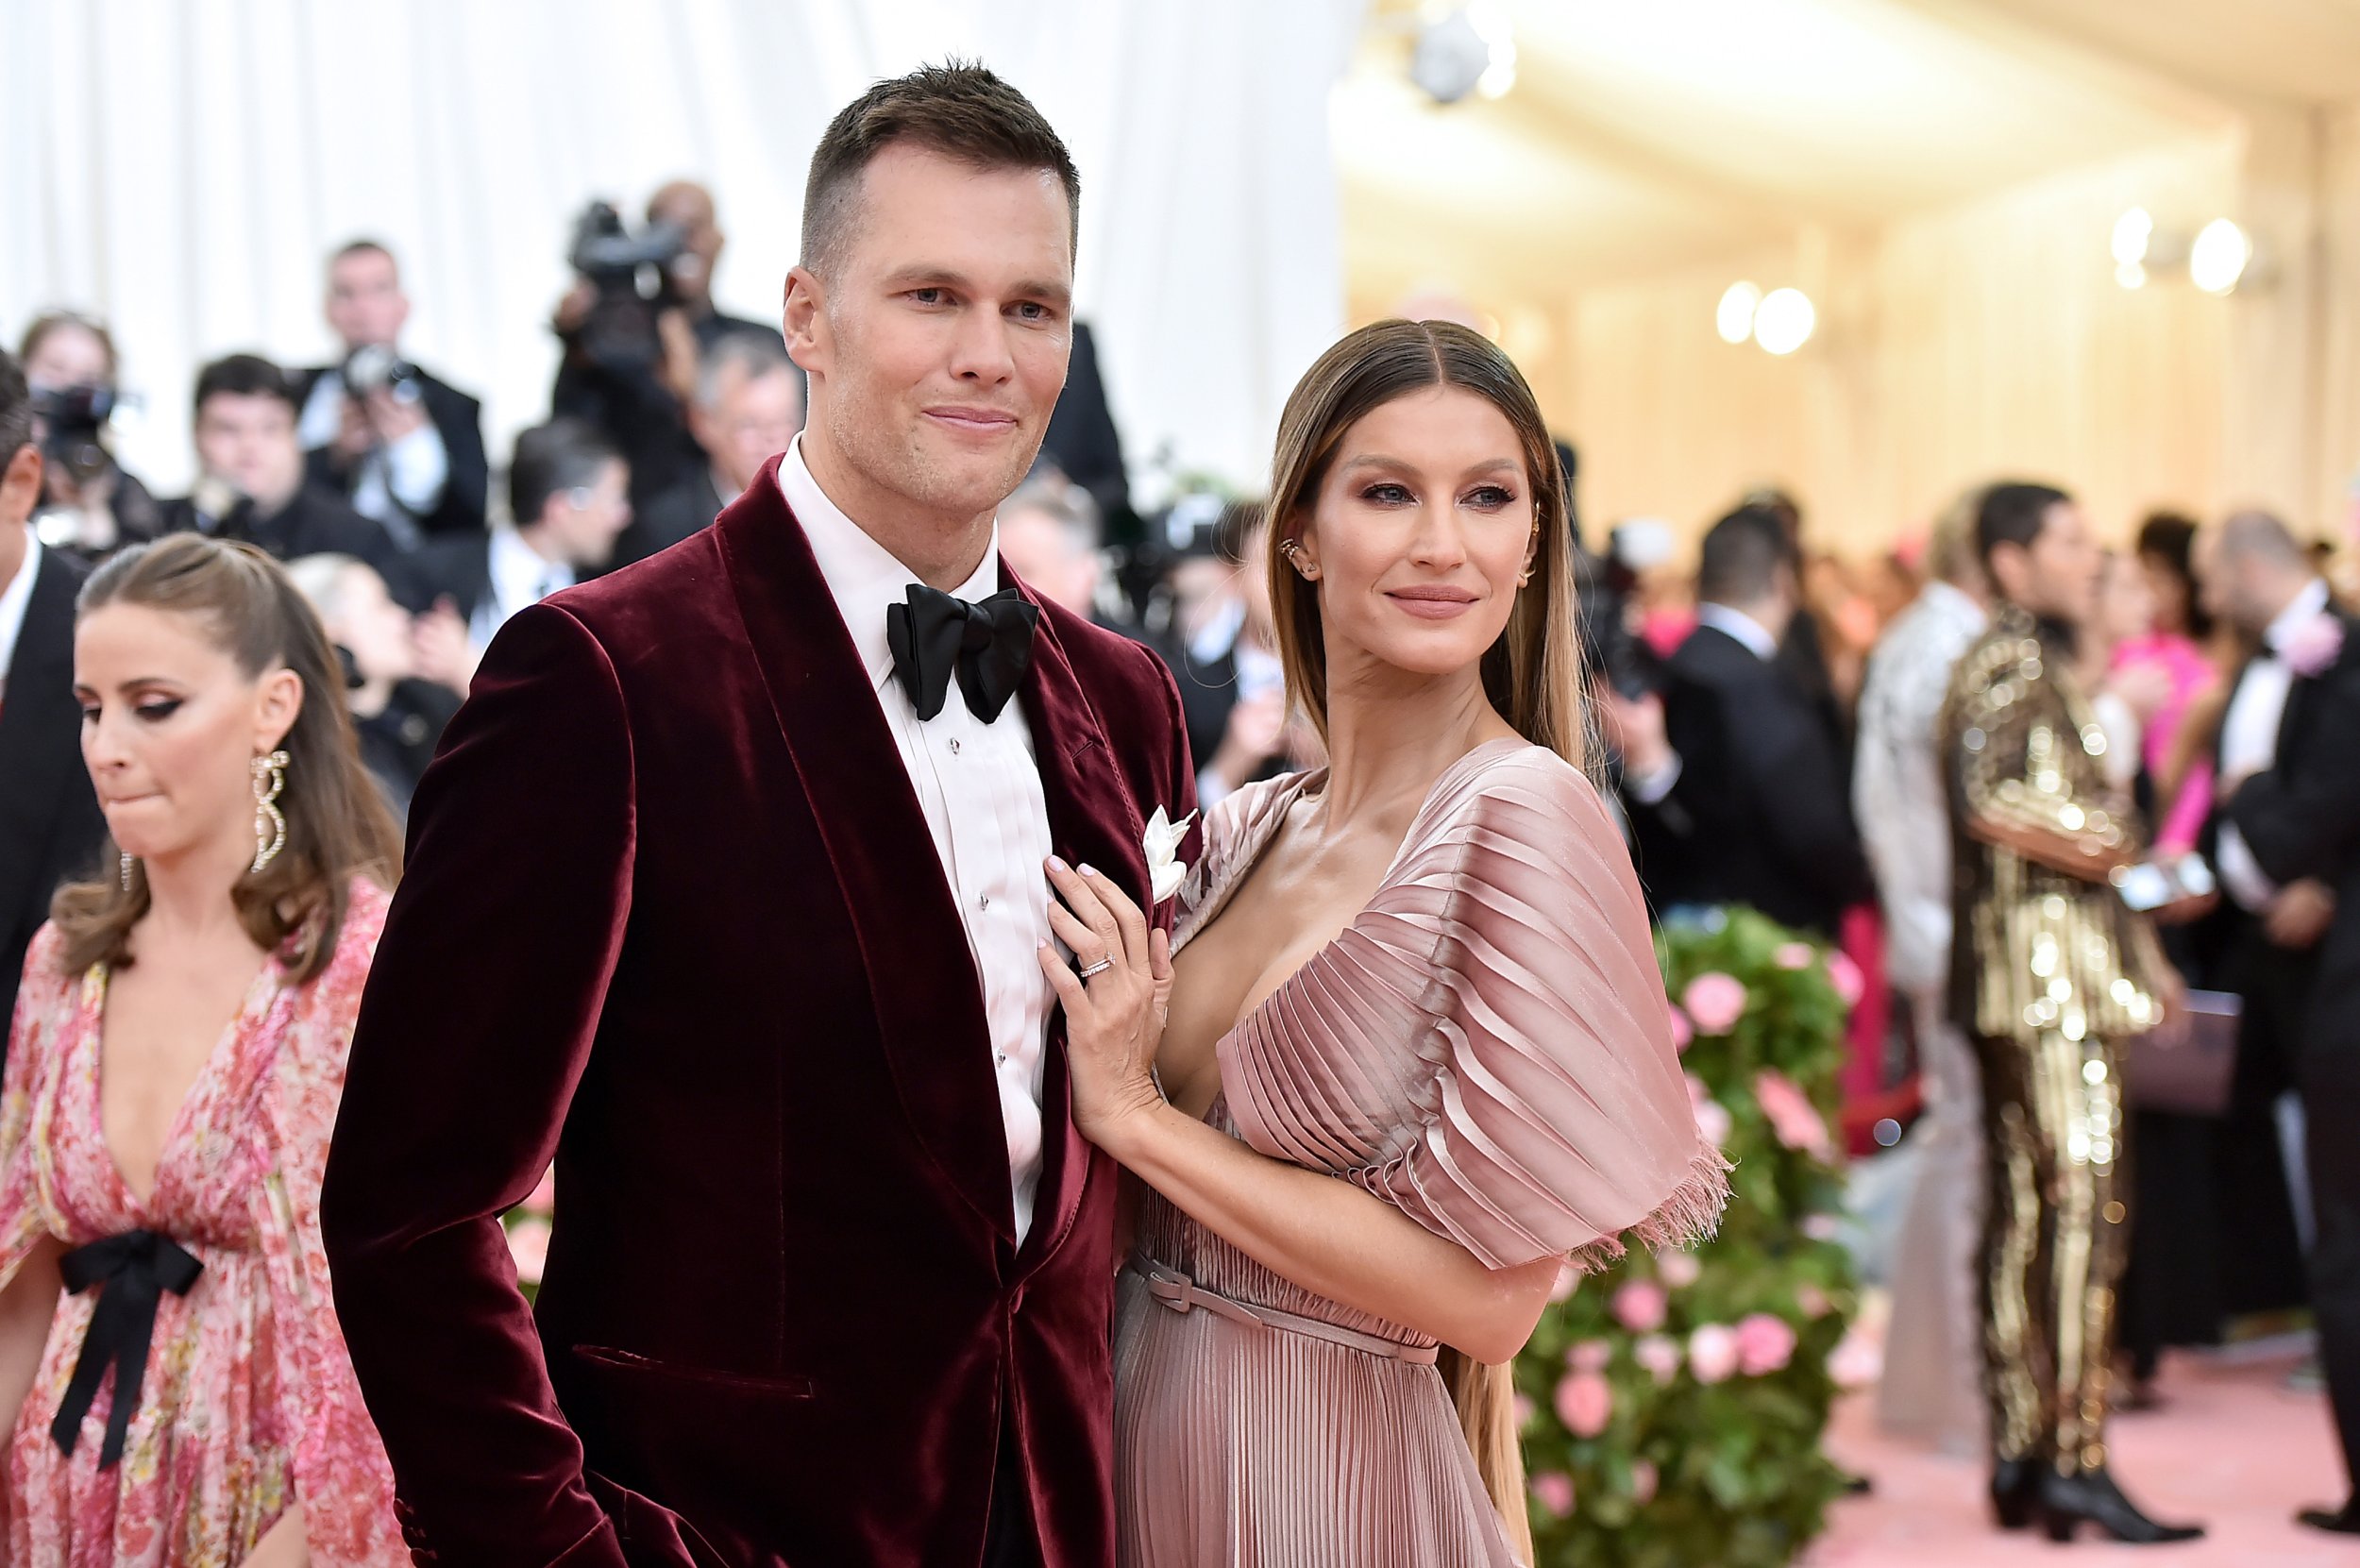 Tom Brady Reveals How NFL Career Affected His Priorities Amid Gisele